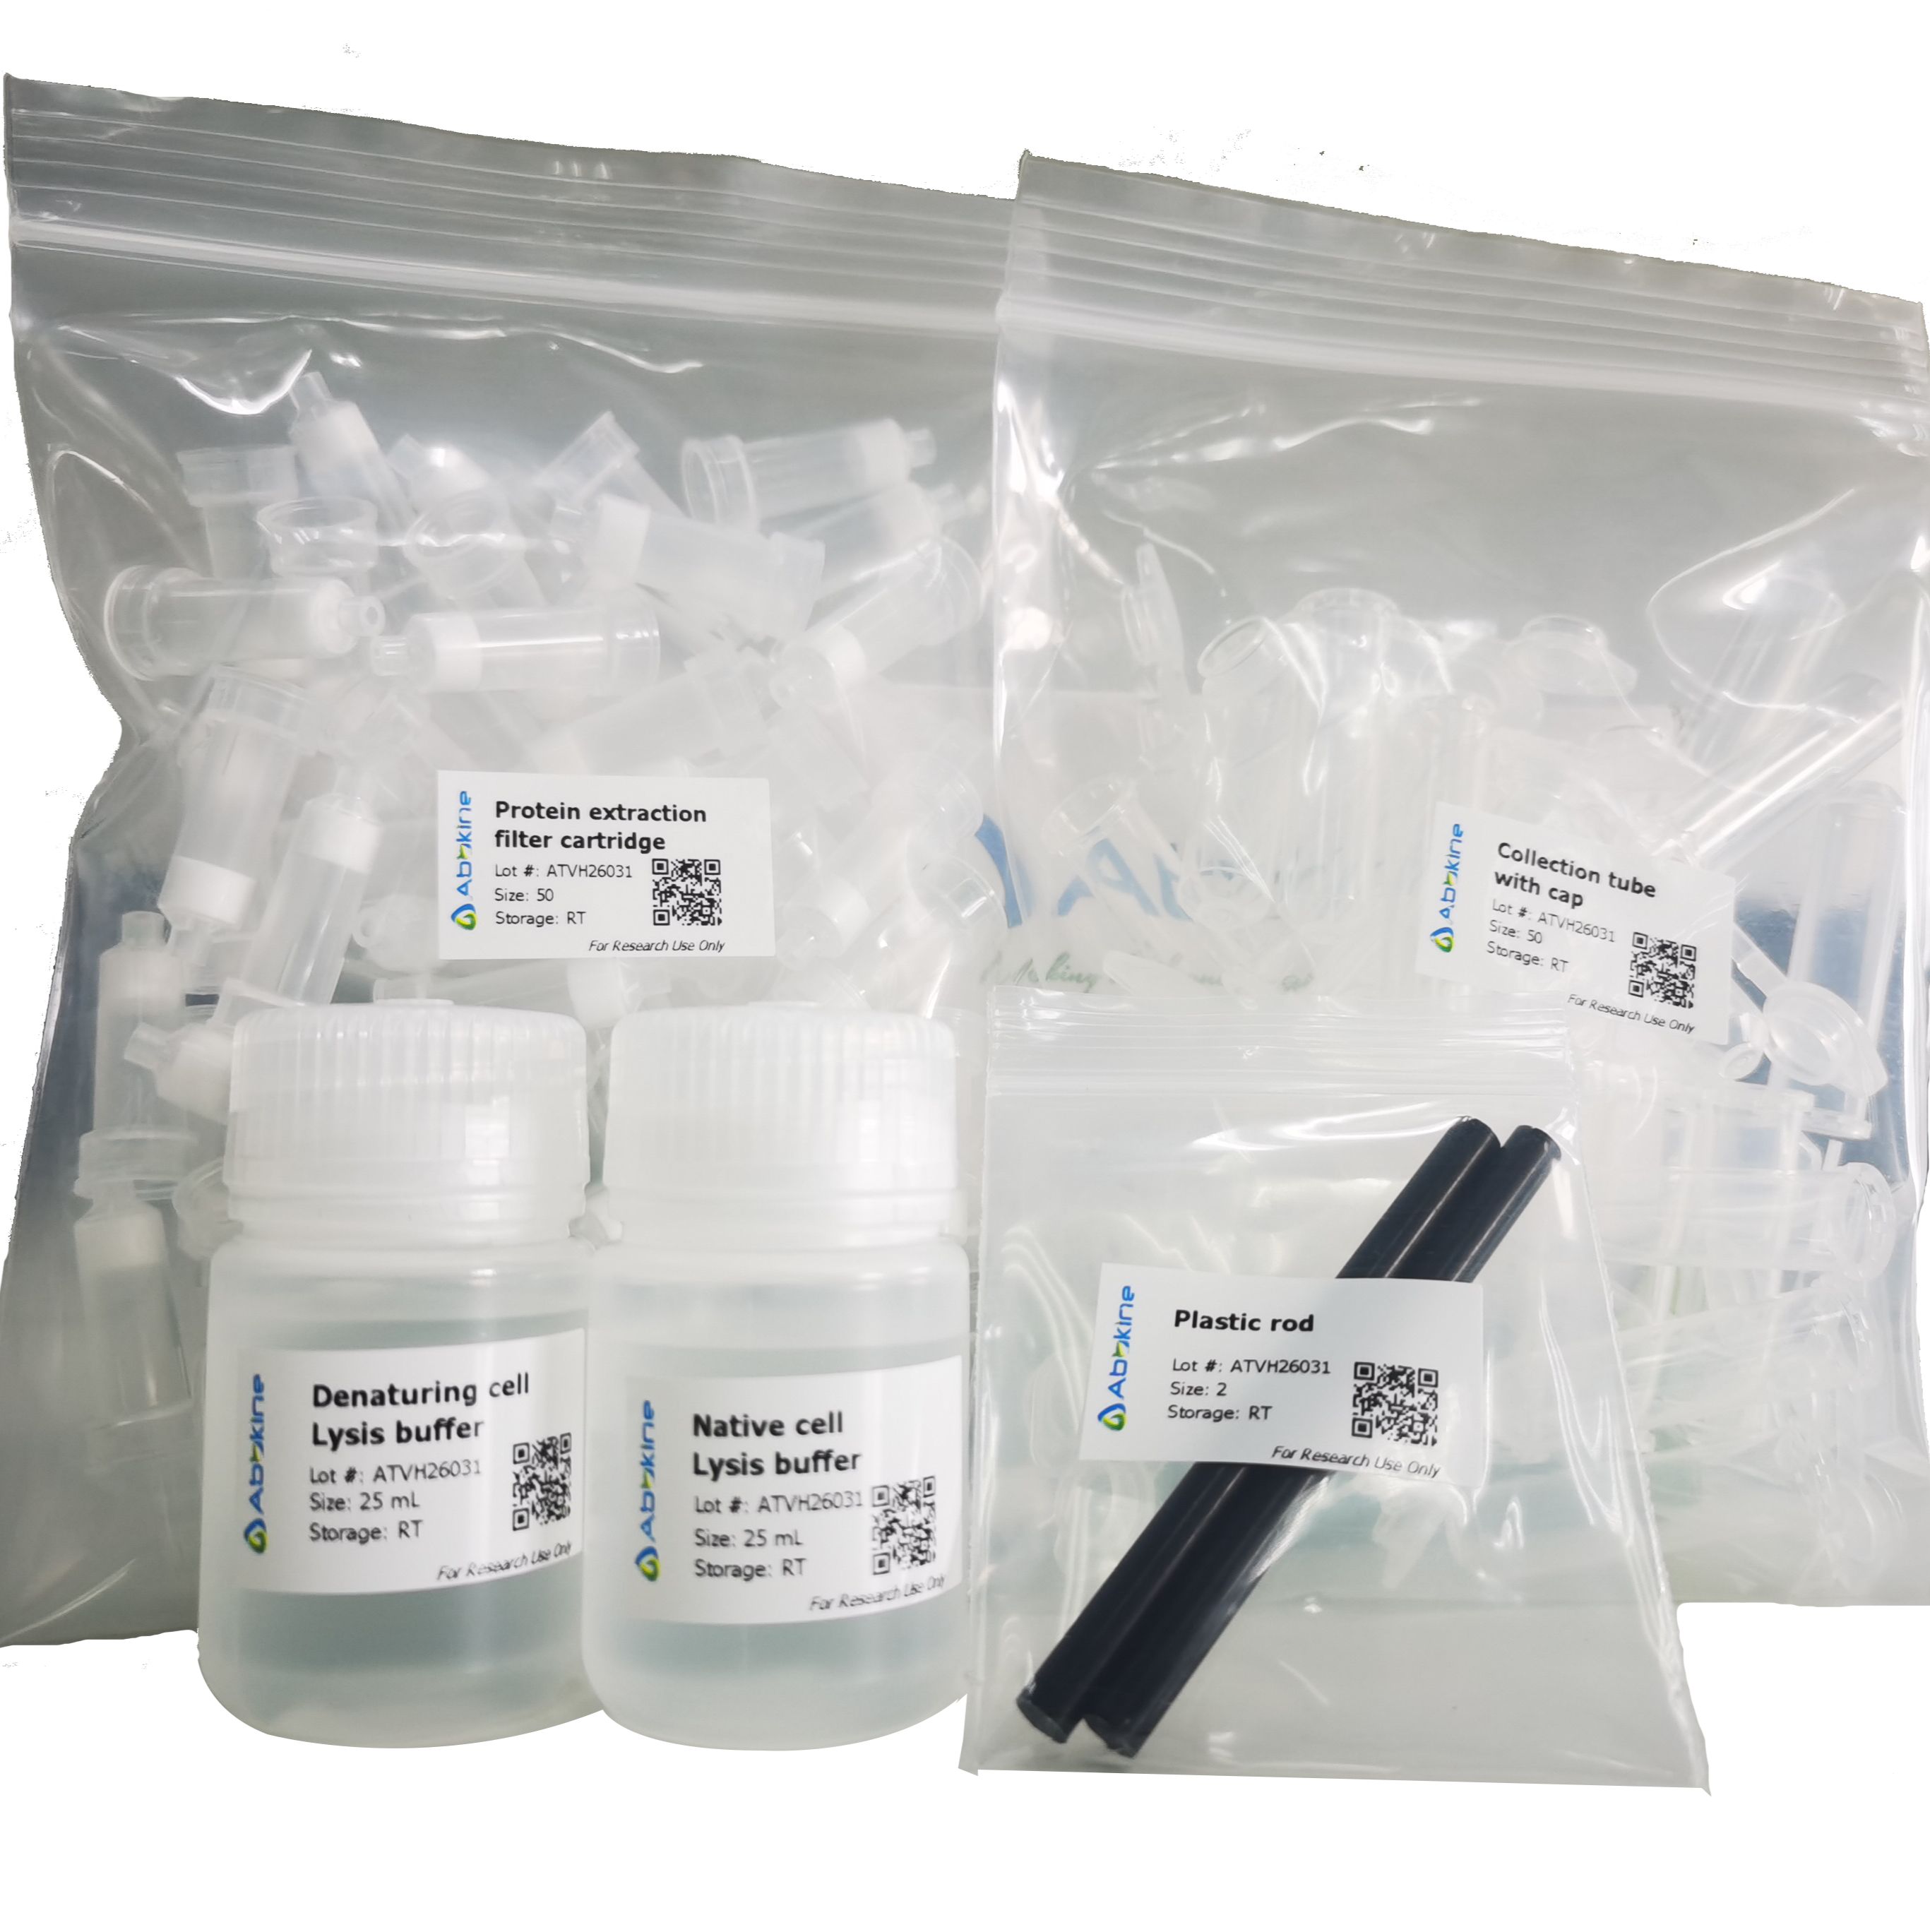 ExKine™ Pro植物组织总蛋白提取试剂盒（柱式法）/ExKine™ Pro Total Protein Extraction Kit for Plant Tissues